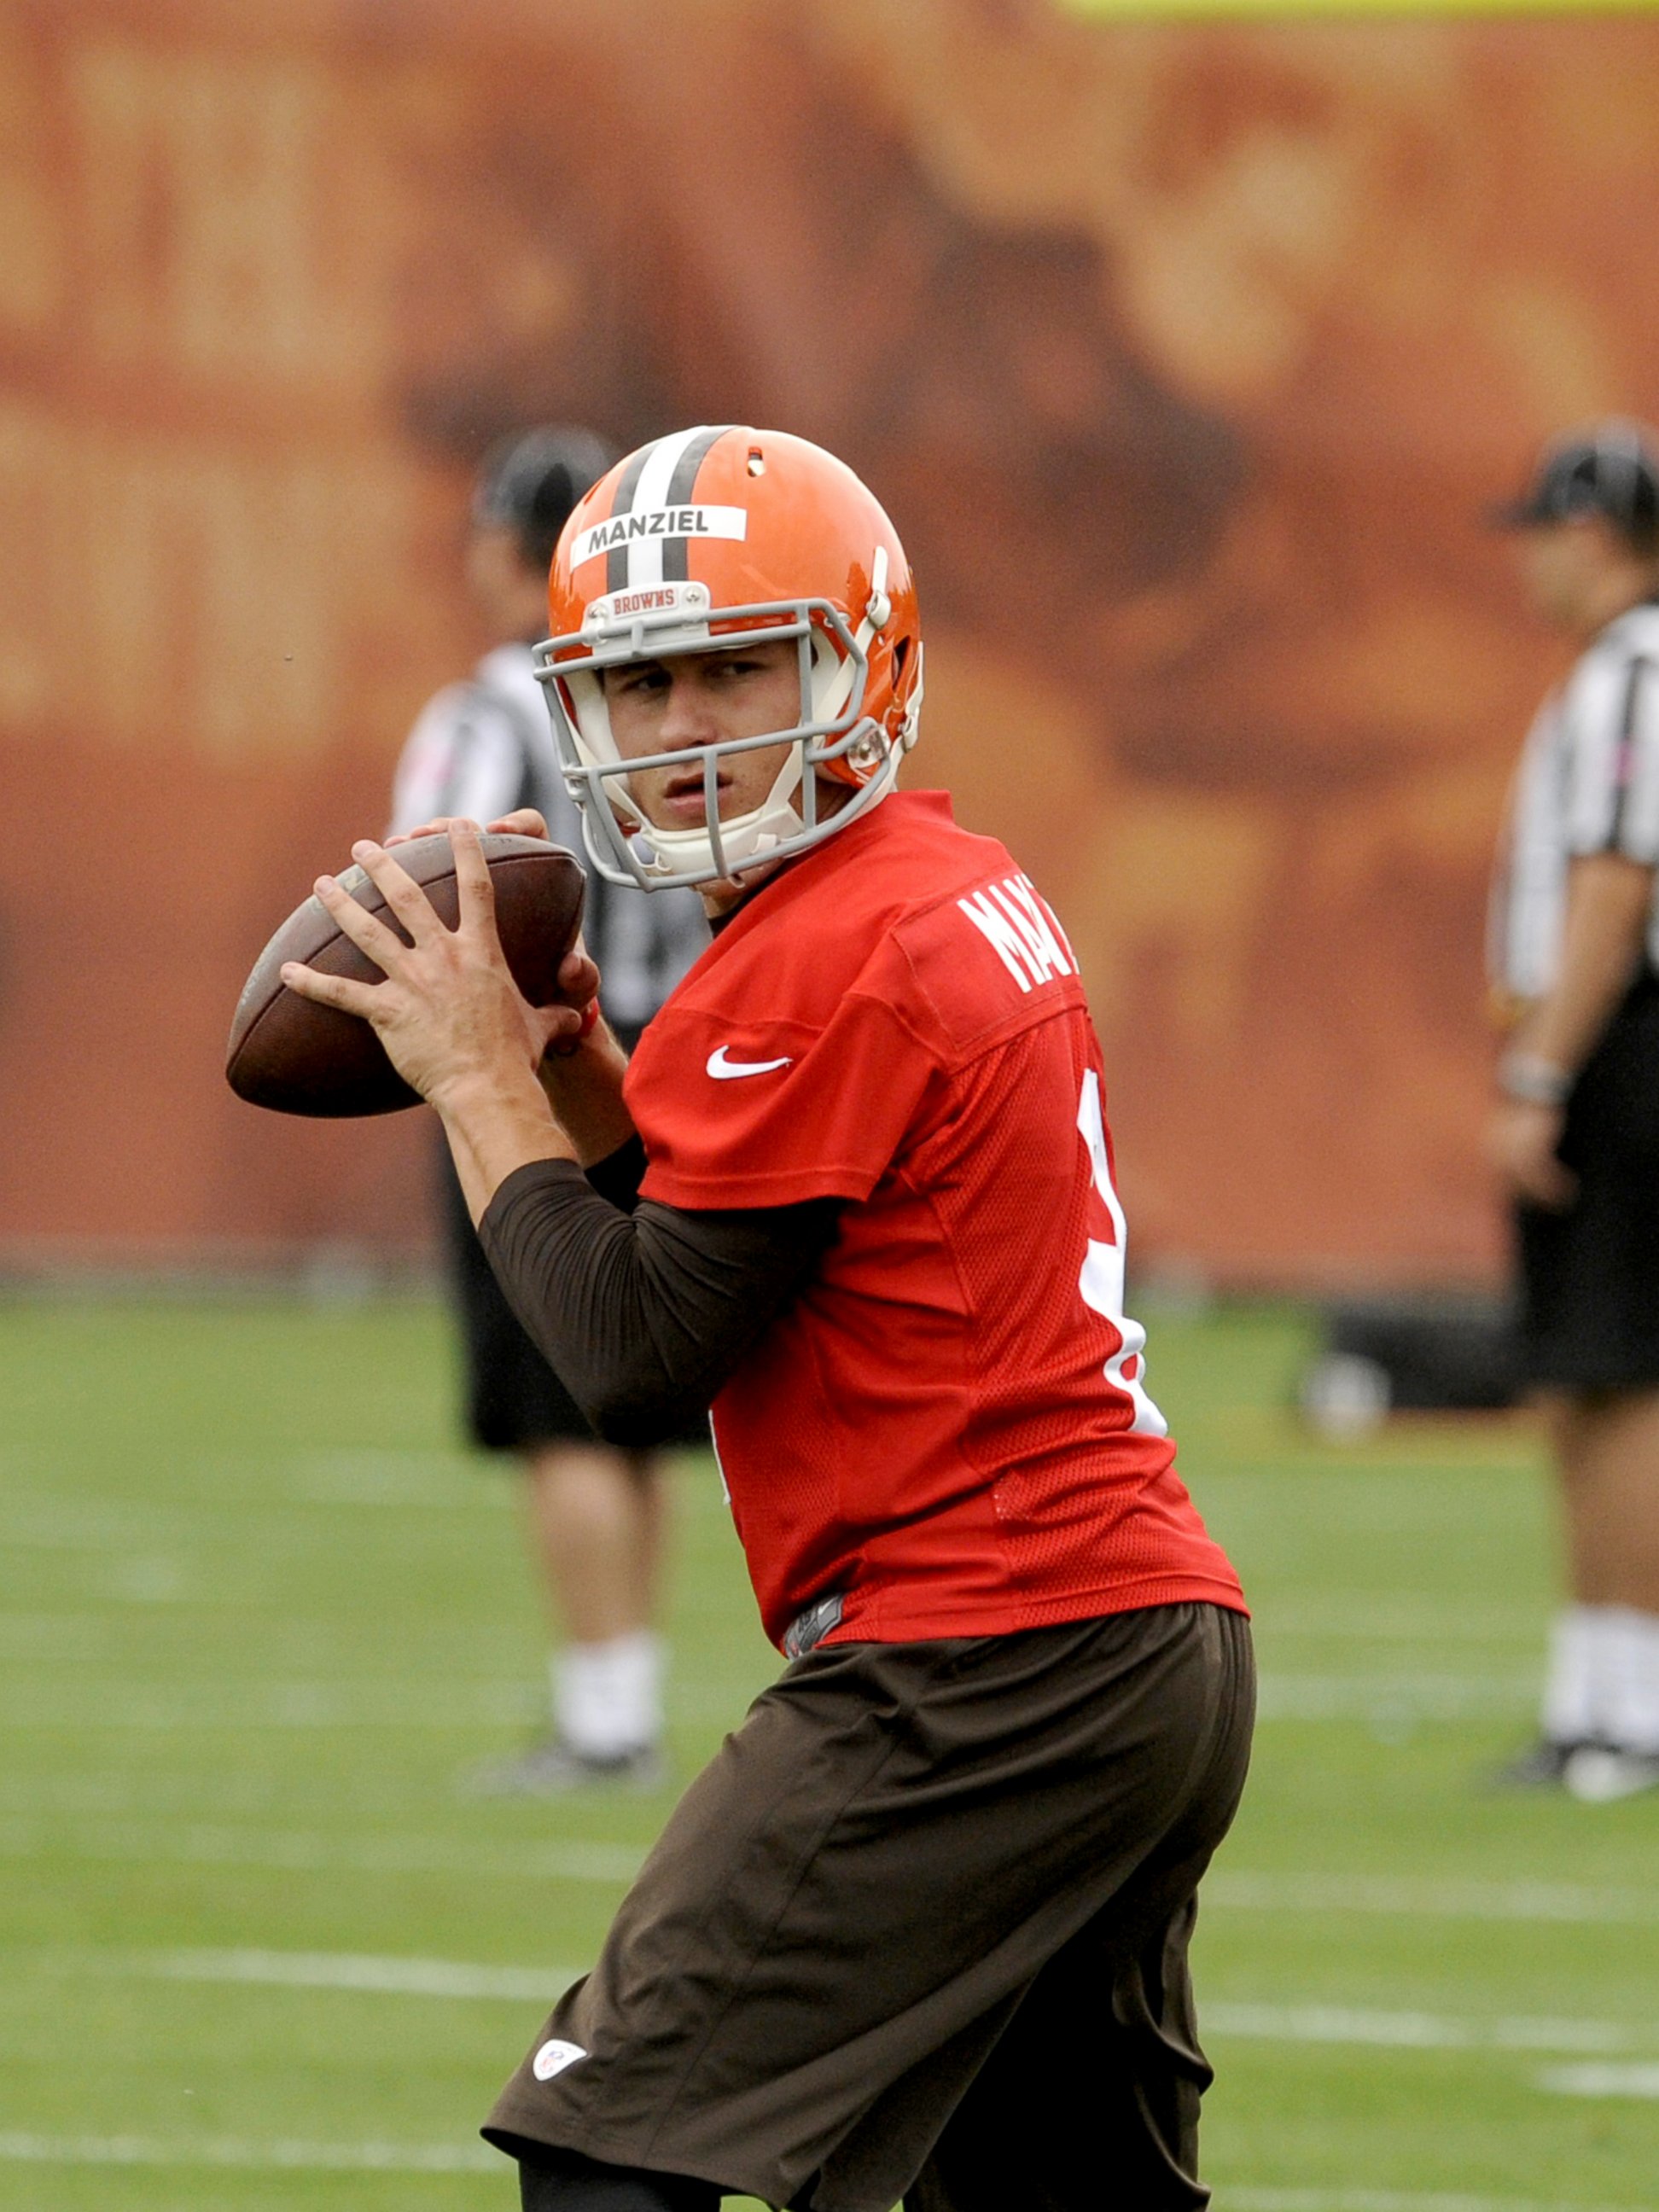 PHOTO: Johnny Manziel of the Cleveland Browns is pictured in Berea, Ohio on May 28, 2014. 